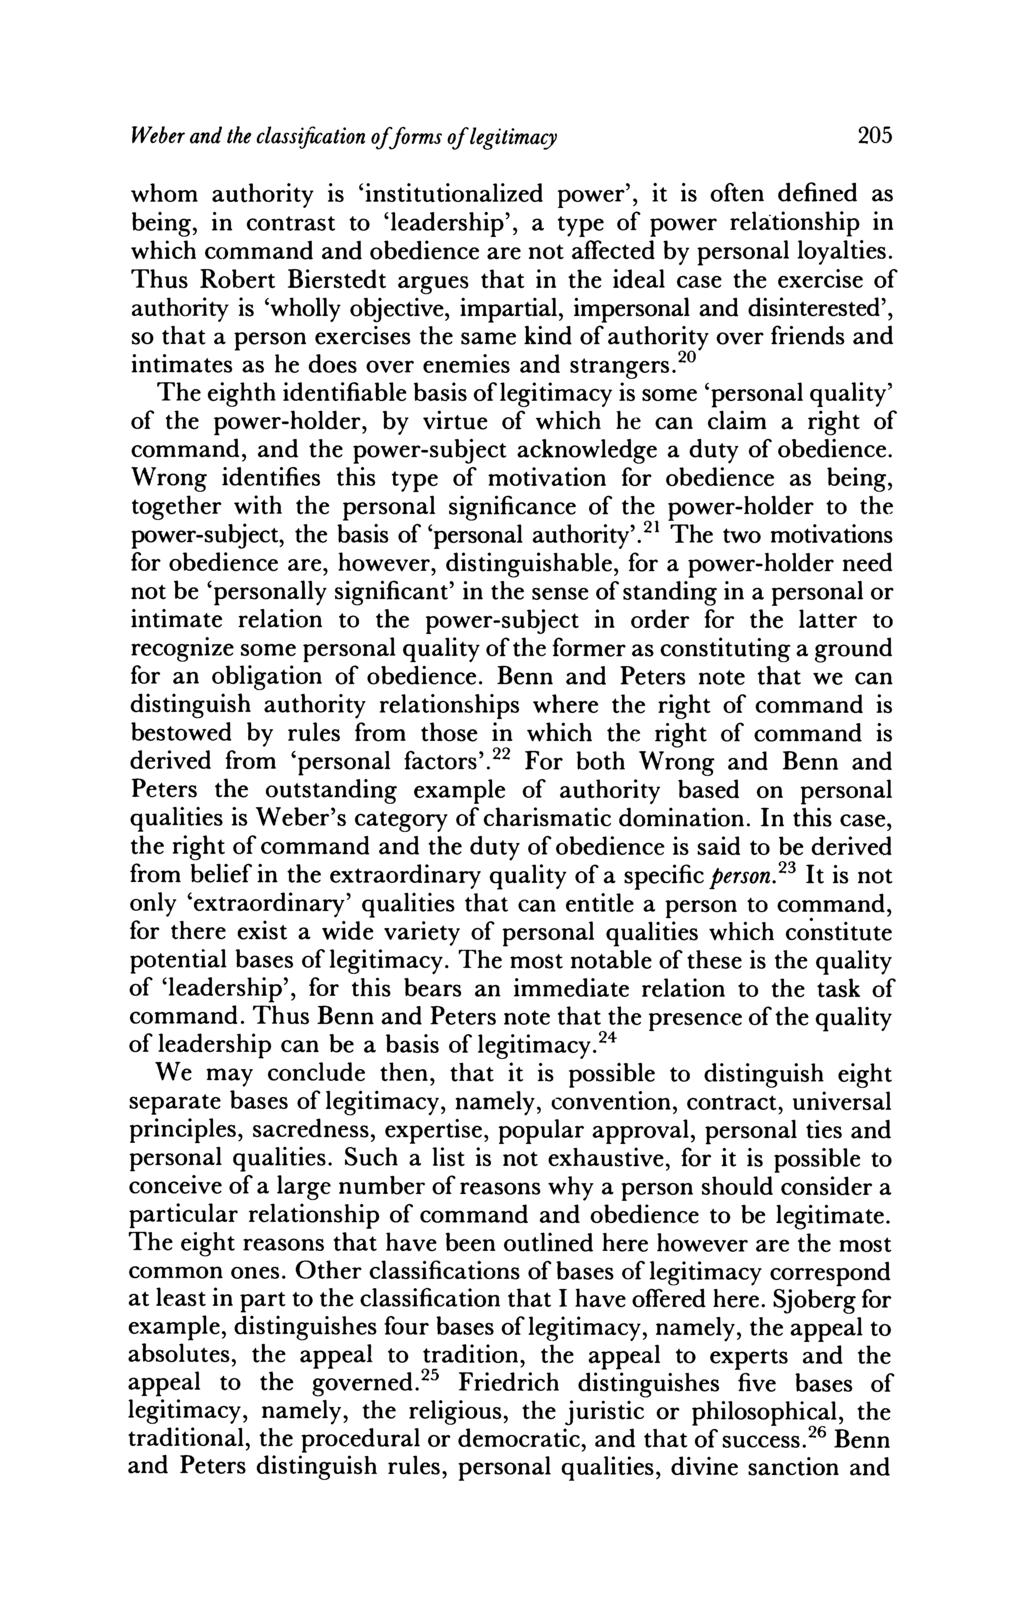 Weber and the classiyication offorms of legztimacy 205 whom authority is 'institutionalized power', it is often defined as being, in contrast to 'leadership', a type of power relationship in which